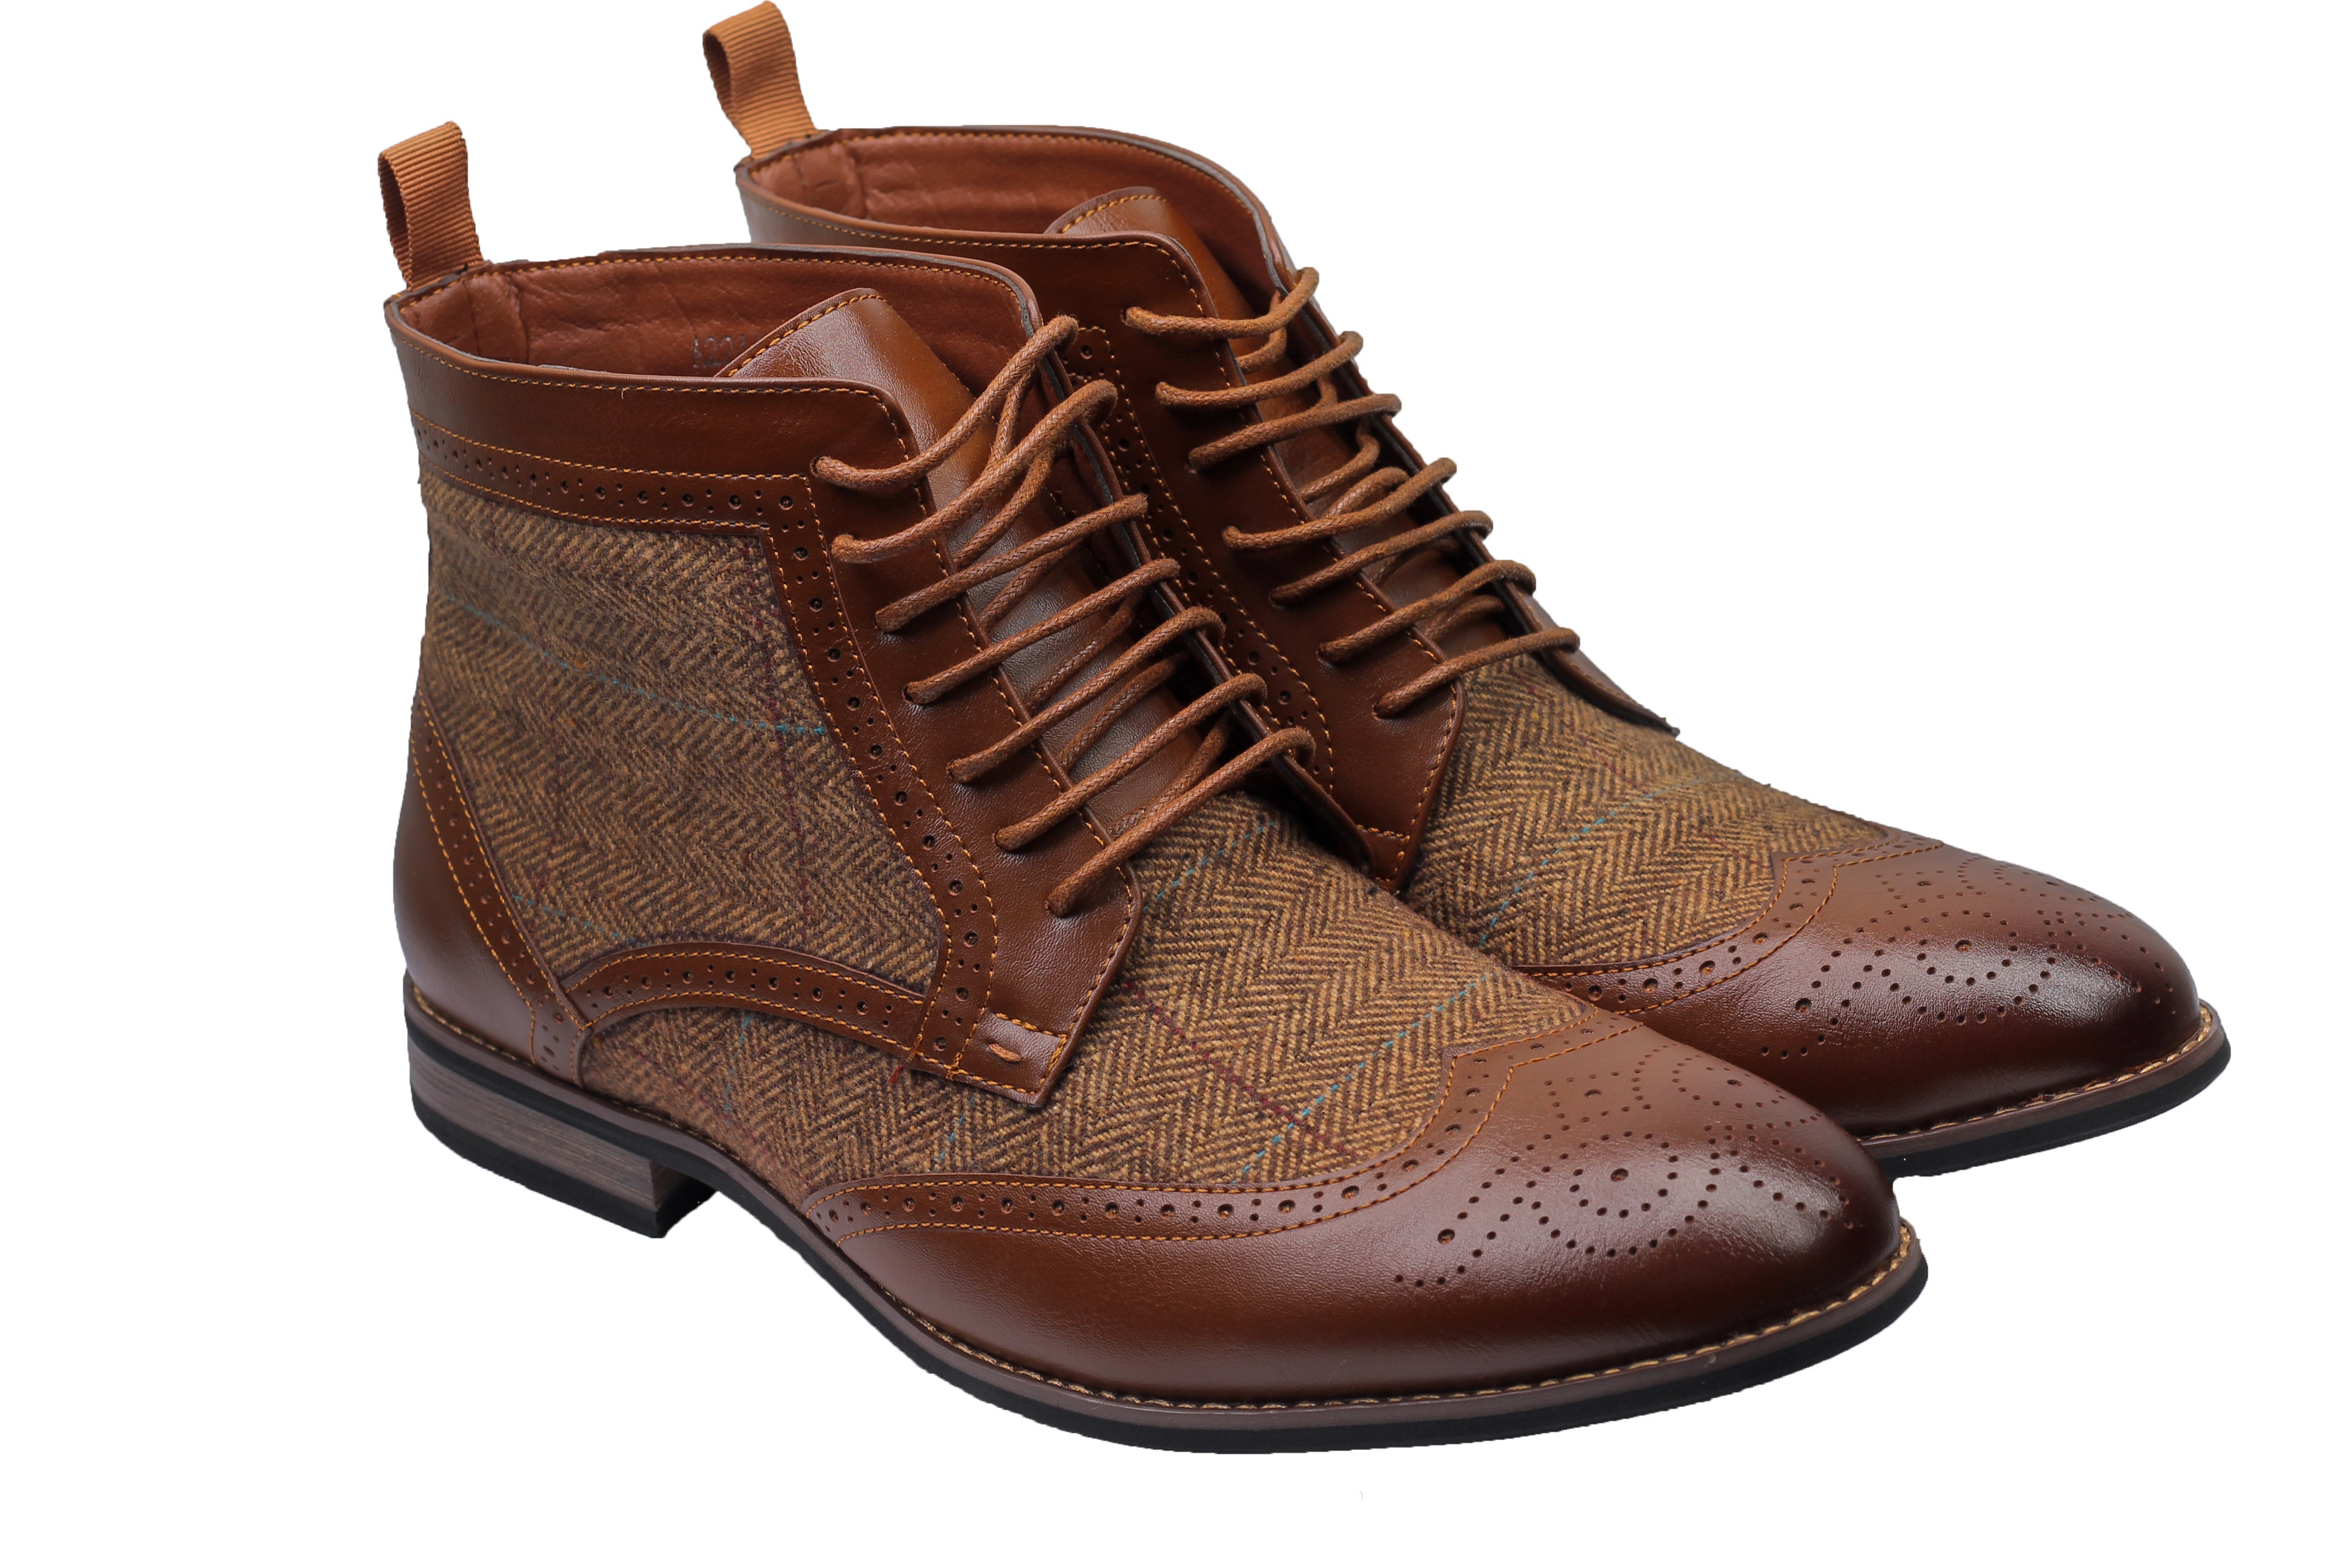 TWEED BROGUE BOOTS LACE UP